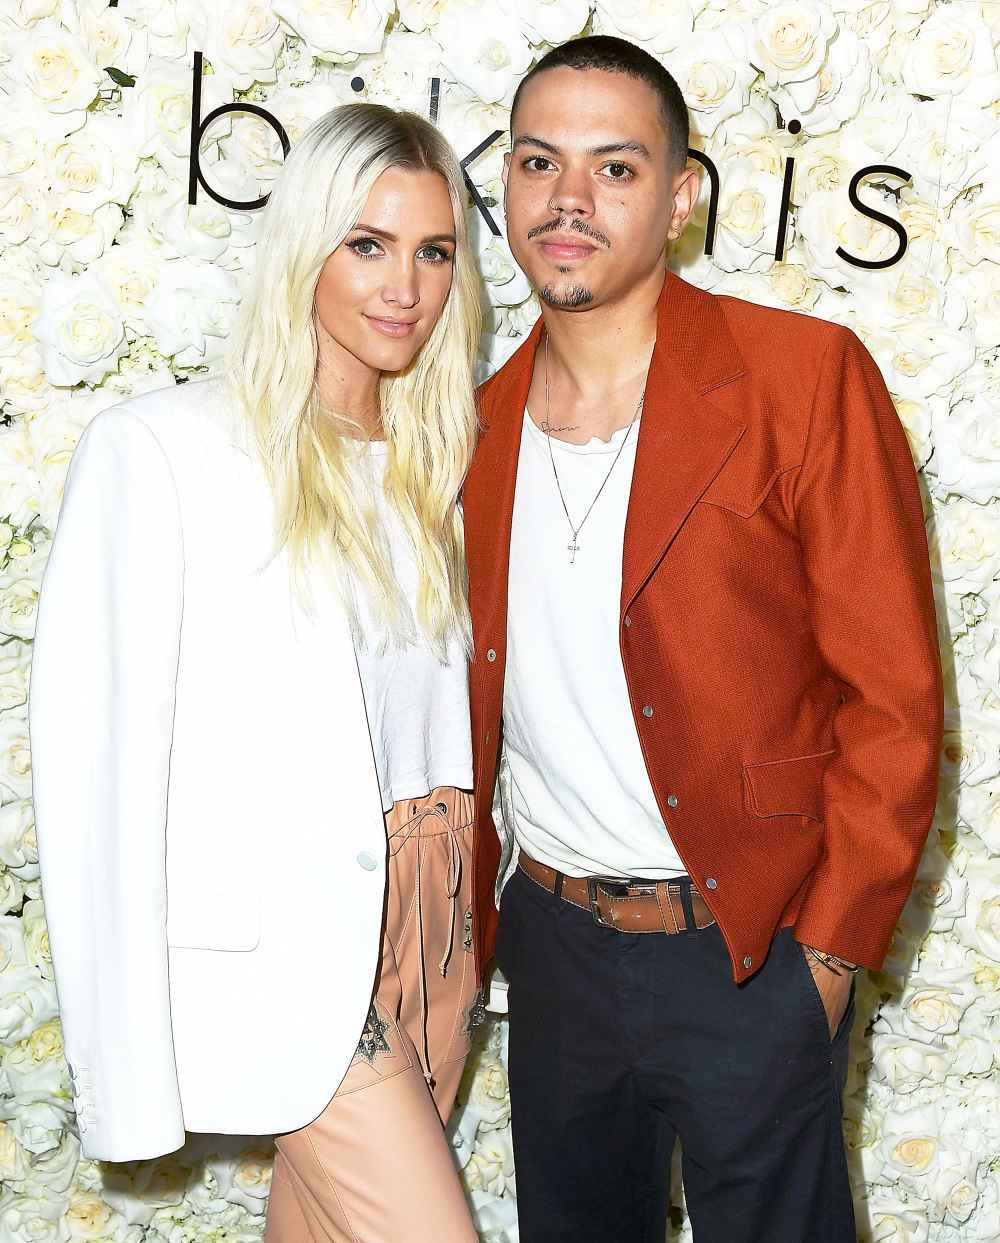 Ashlee Simpson and Evan Ross arrive at the Gigi C Bikinis pop-up launch event at The Park at The Grove in Los Angeles on May 17, 2018.